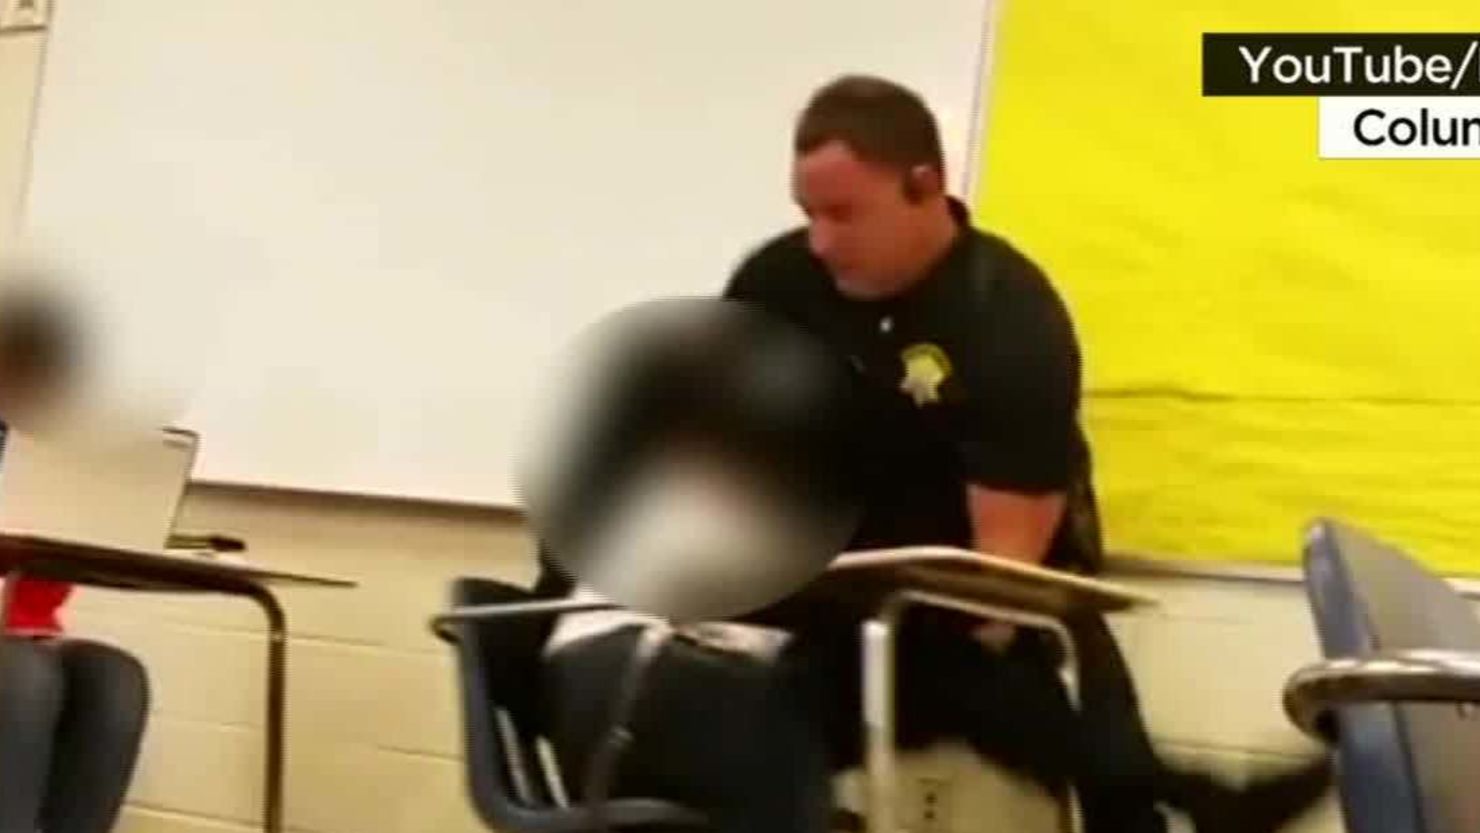 Ben Fields, a school resource officer at Spring Valley High in South Carolina, was caught on video roughing up a student in class.